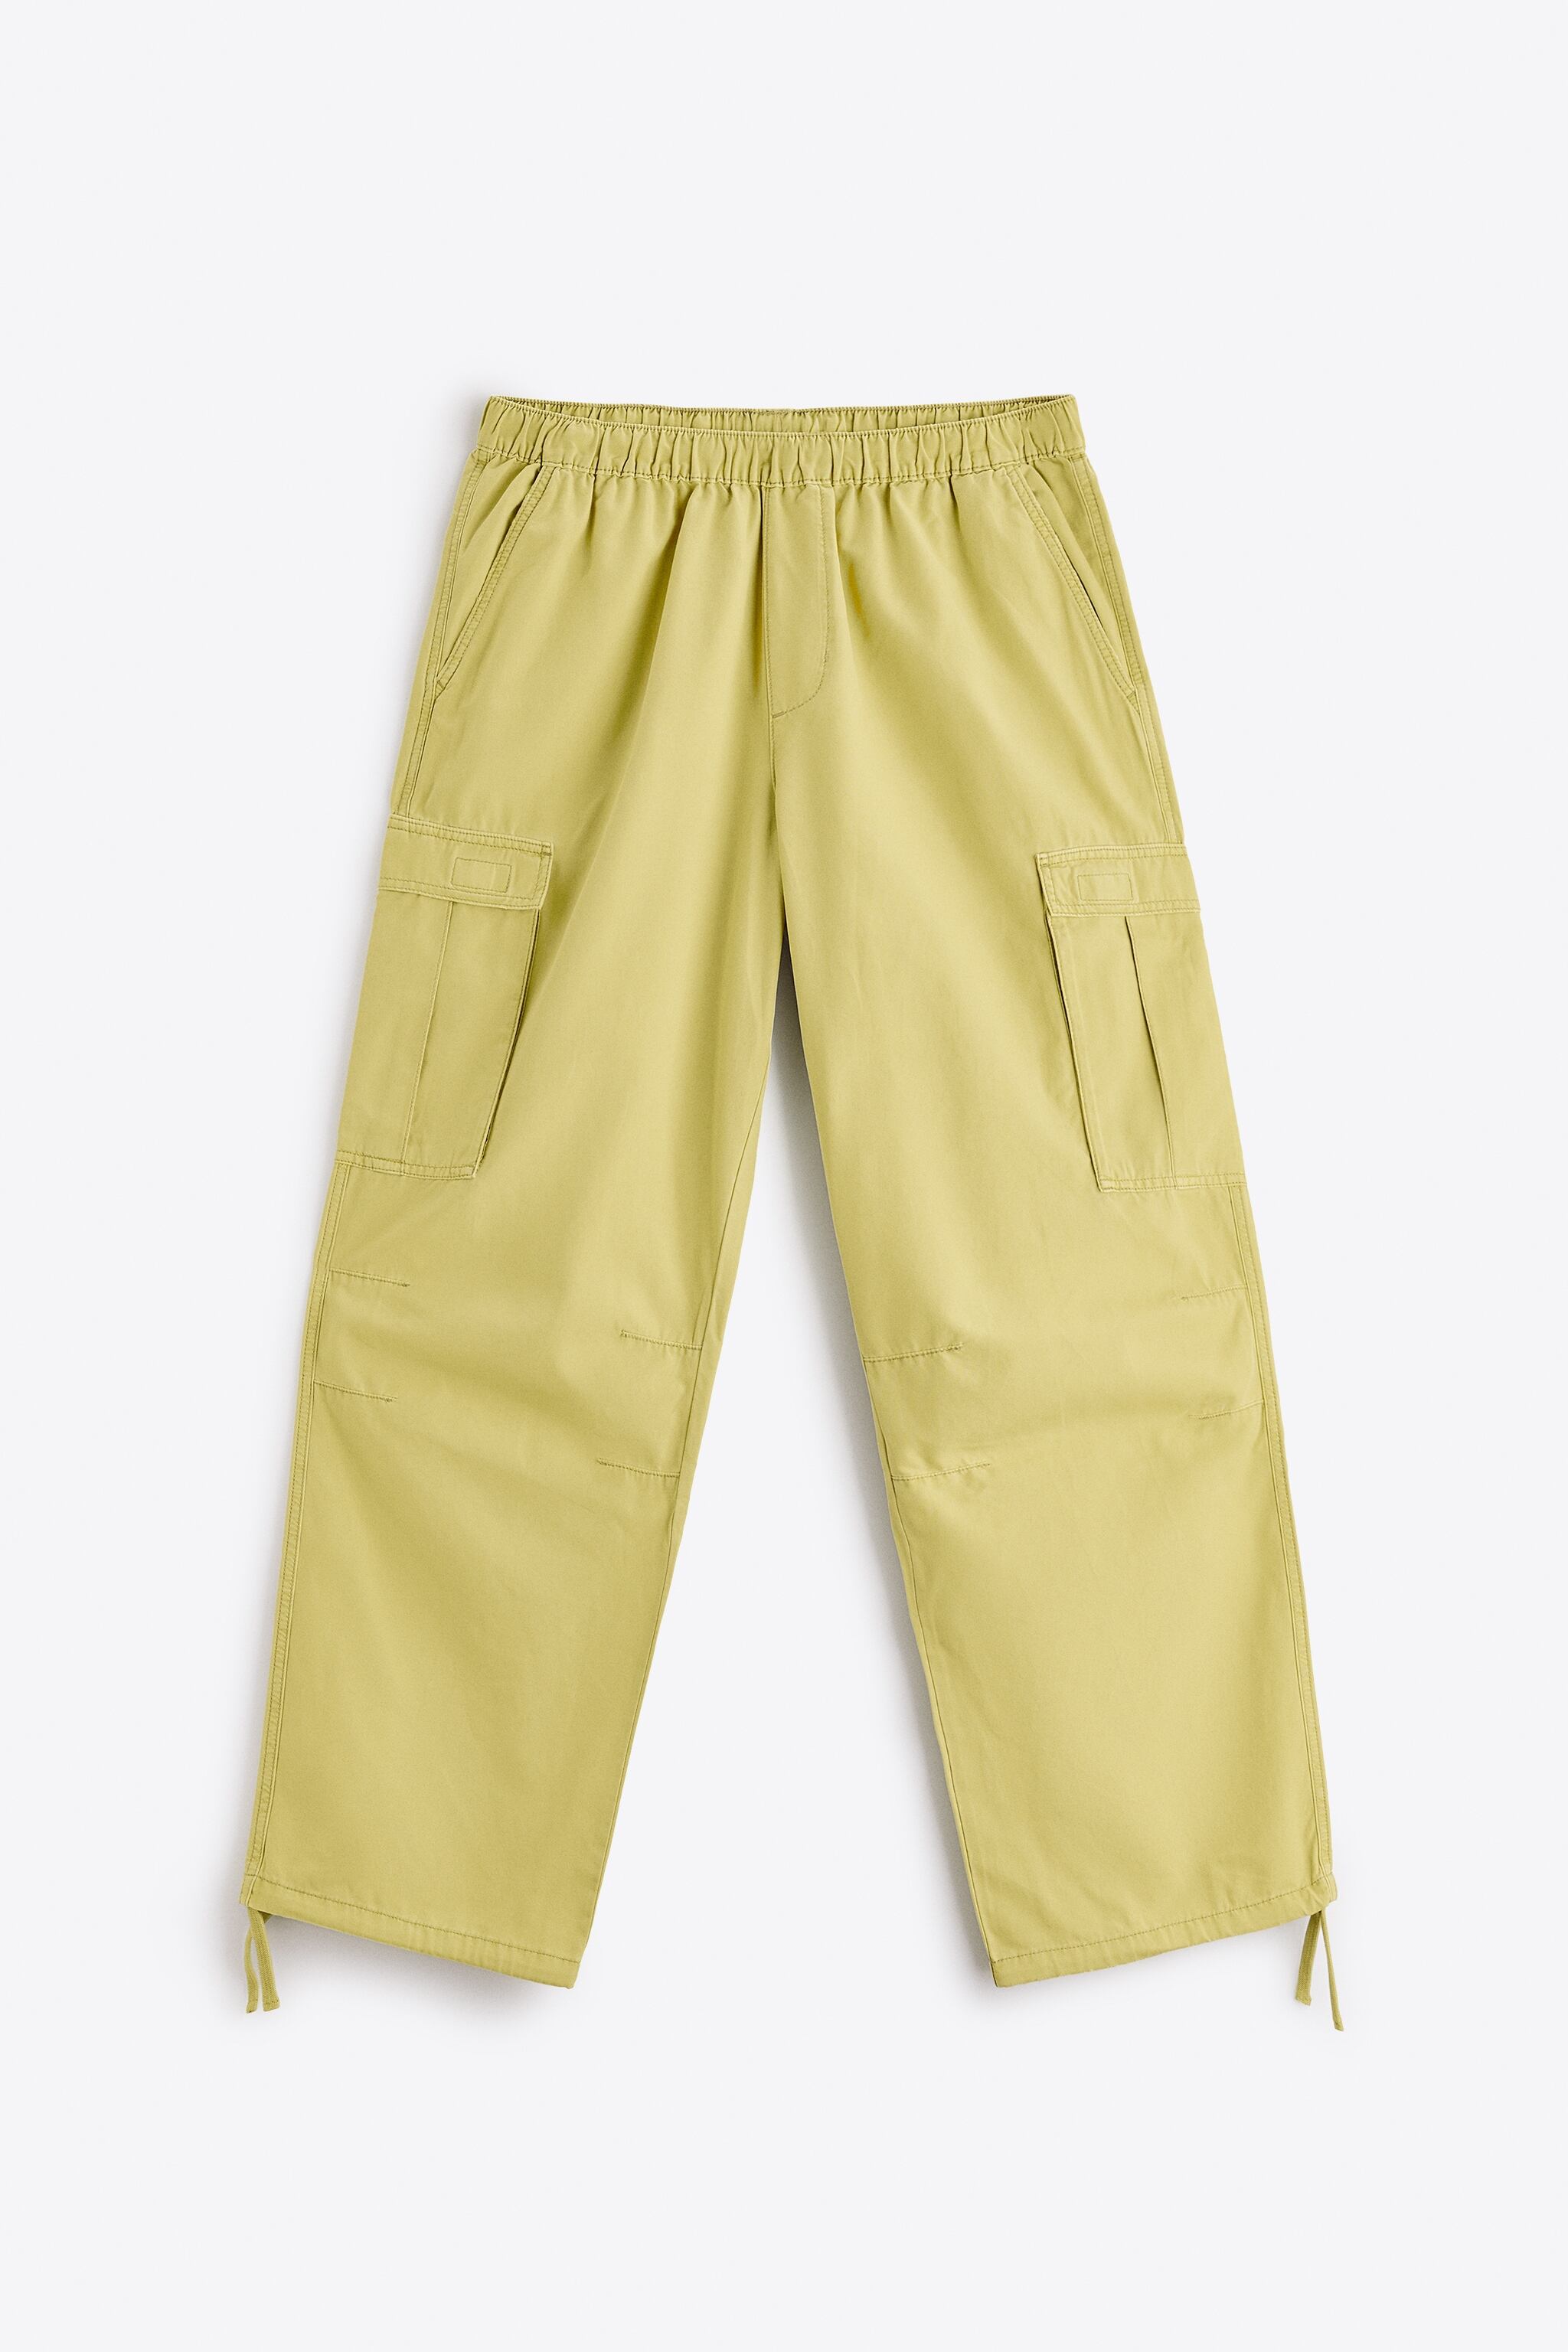 Zara WIDE FIT CARGO PANTS | Yorkdale Mall